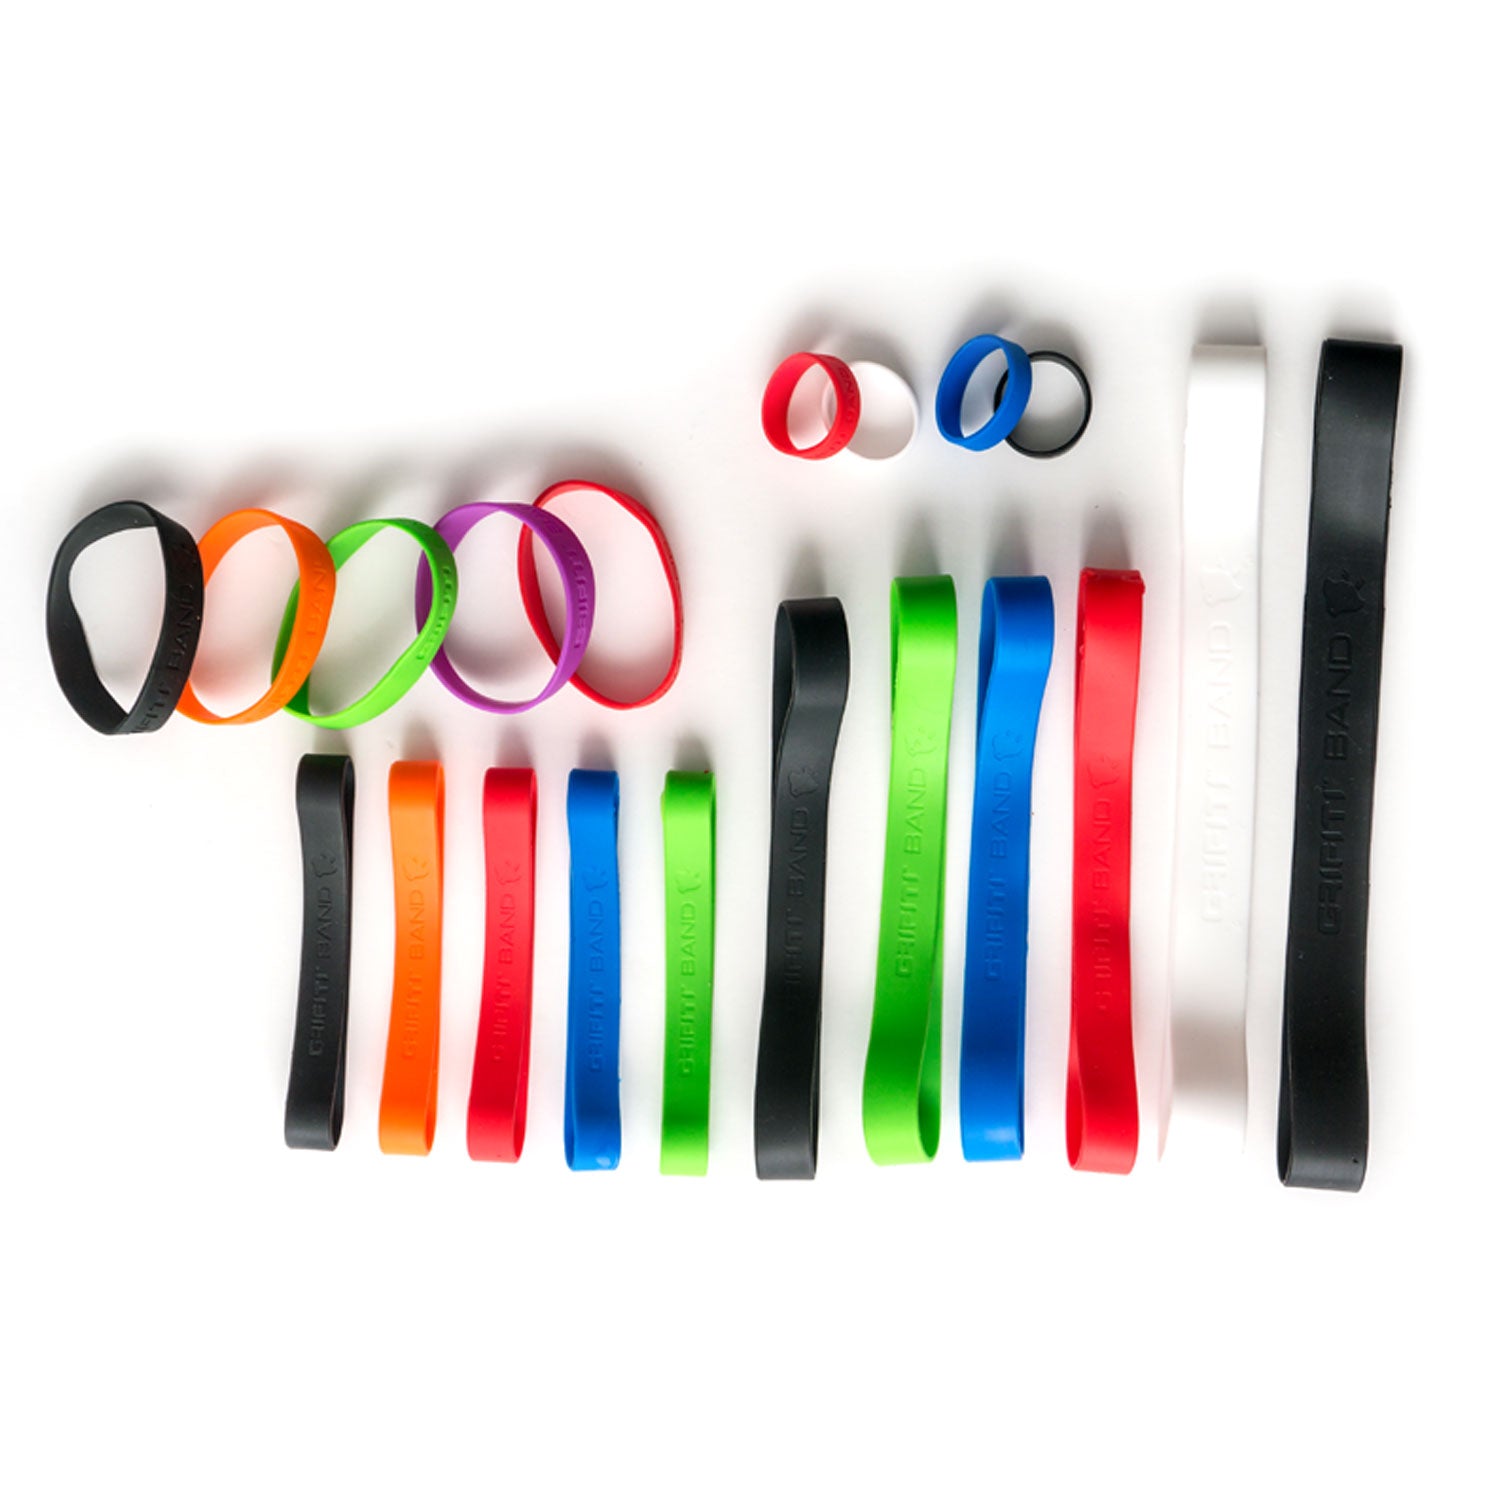 Grifiti Band Joes Silicone Bands Cook Wrap Grip Bundle 20 Assort Size